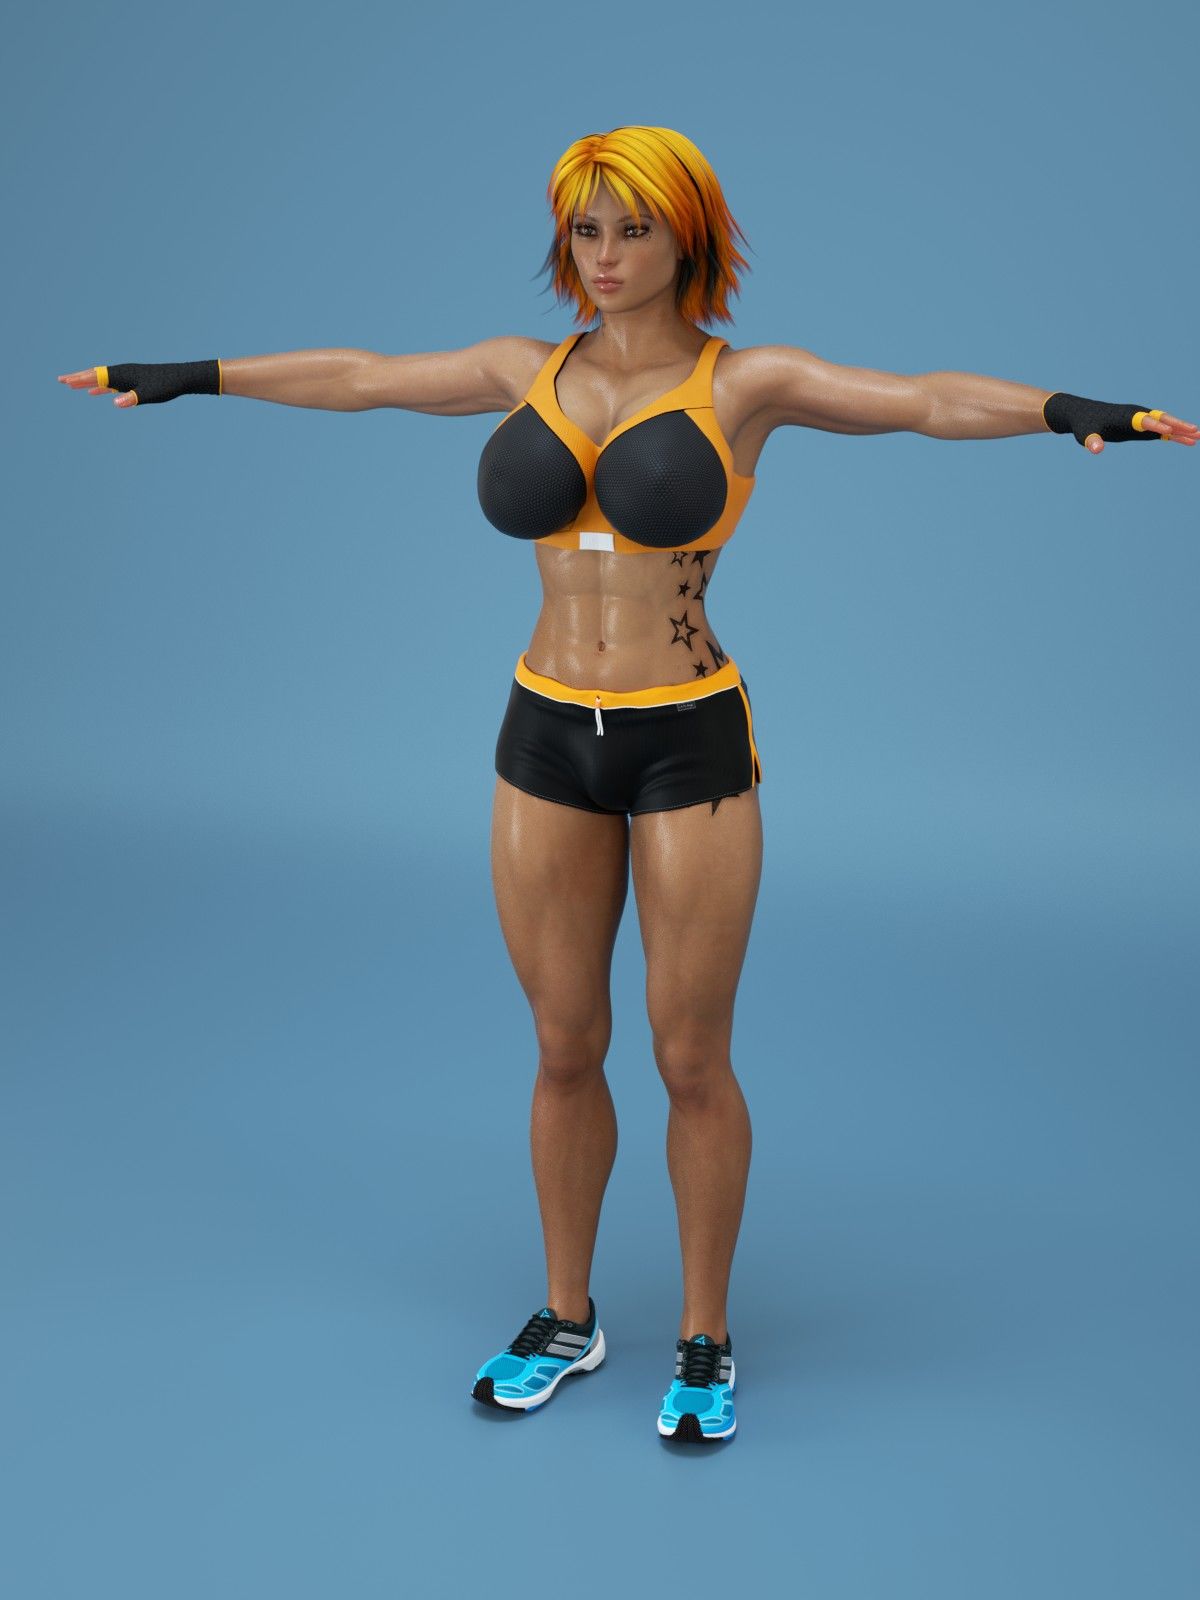 Supro â€“ Workout 2 + Textless +WIPs - part 15